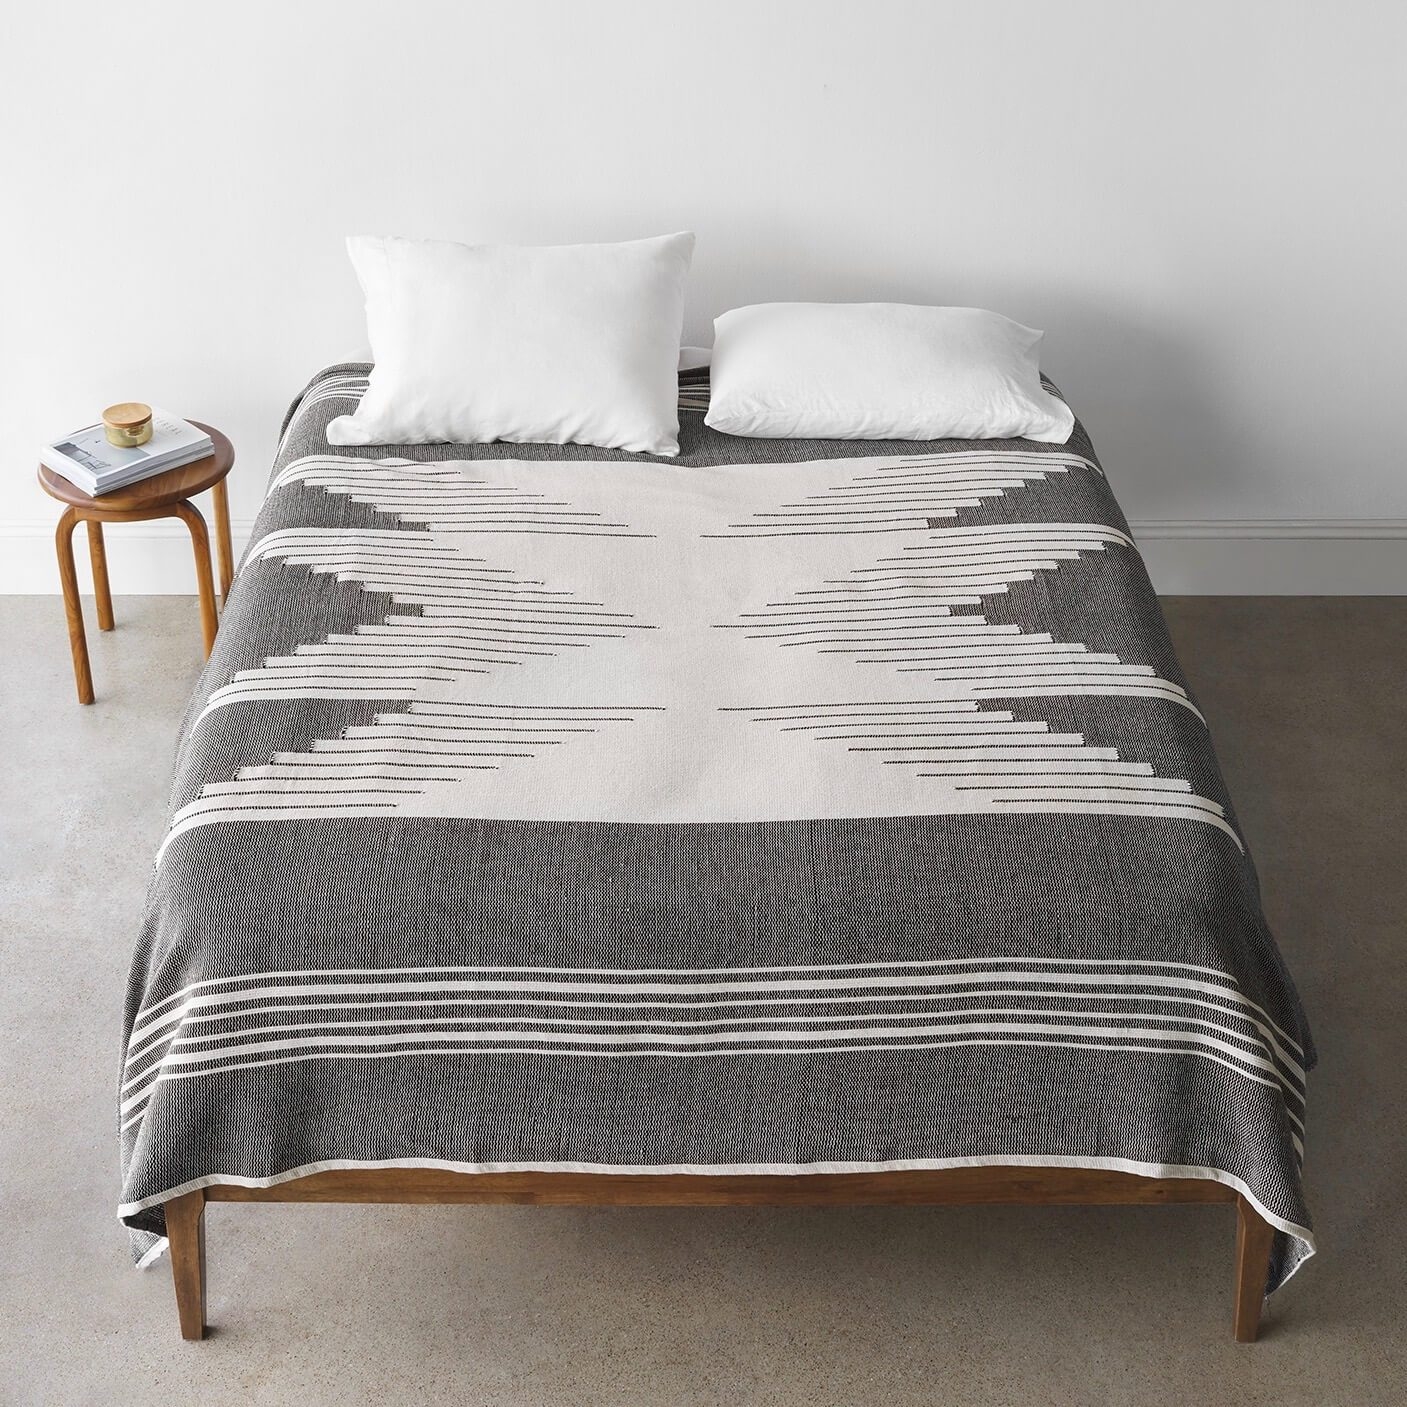 Bico Bed Blanket - Black - King By The Citizenry - Image 0